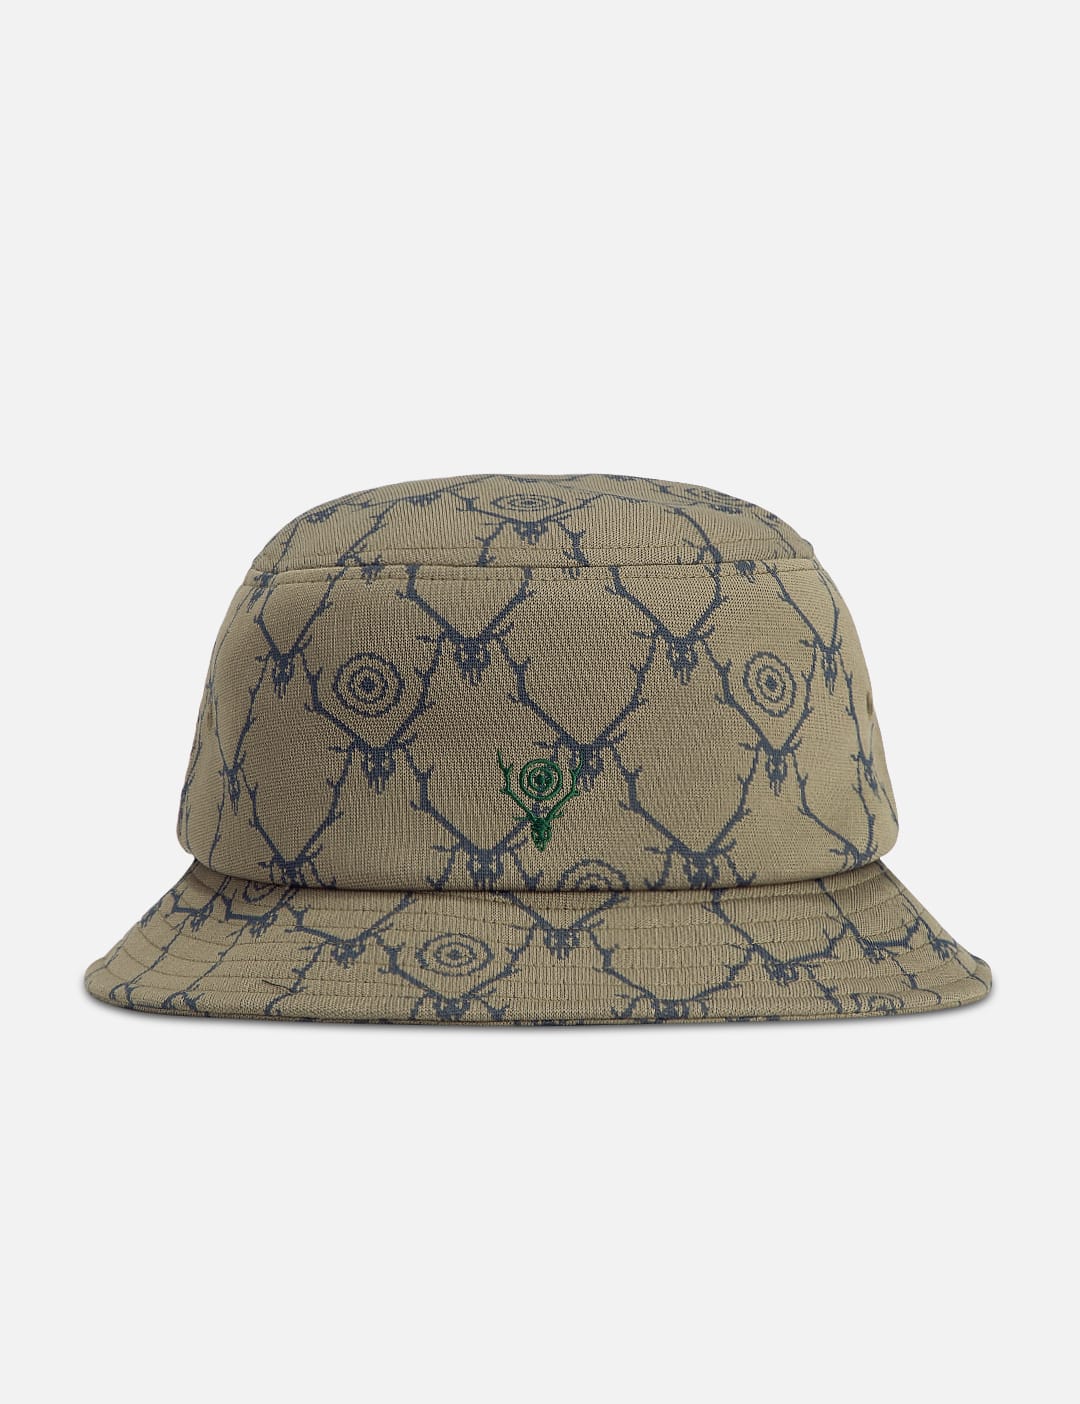 Prada - Re-Nylon Bucket Hat | HBX - Globally Curated Fashion and 